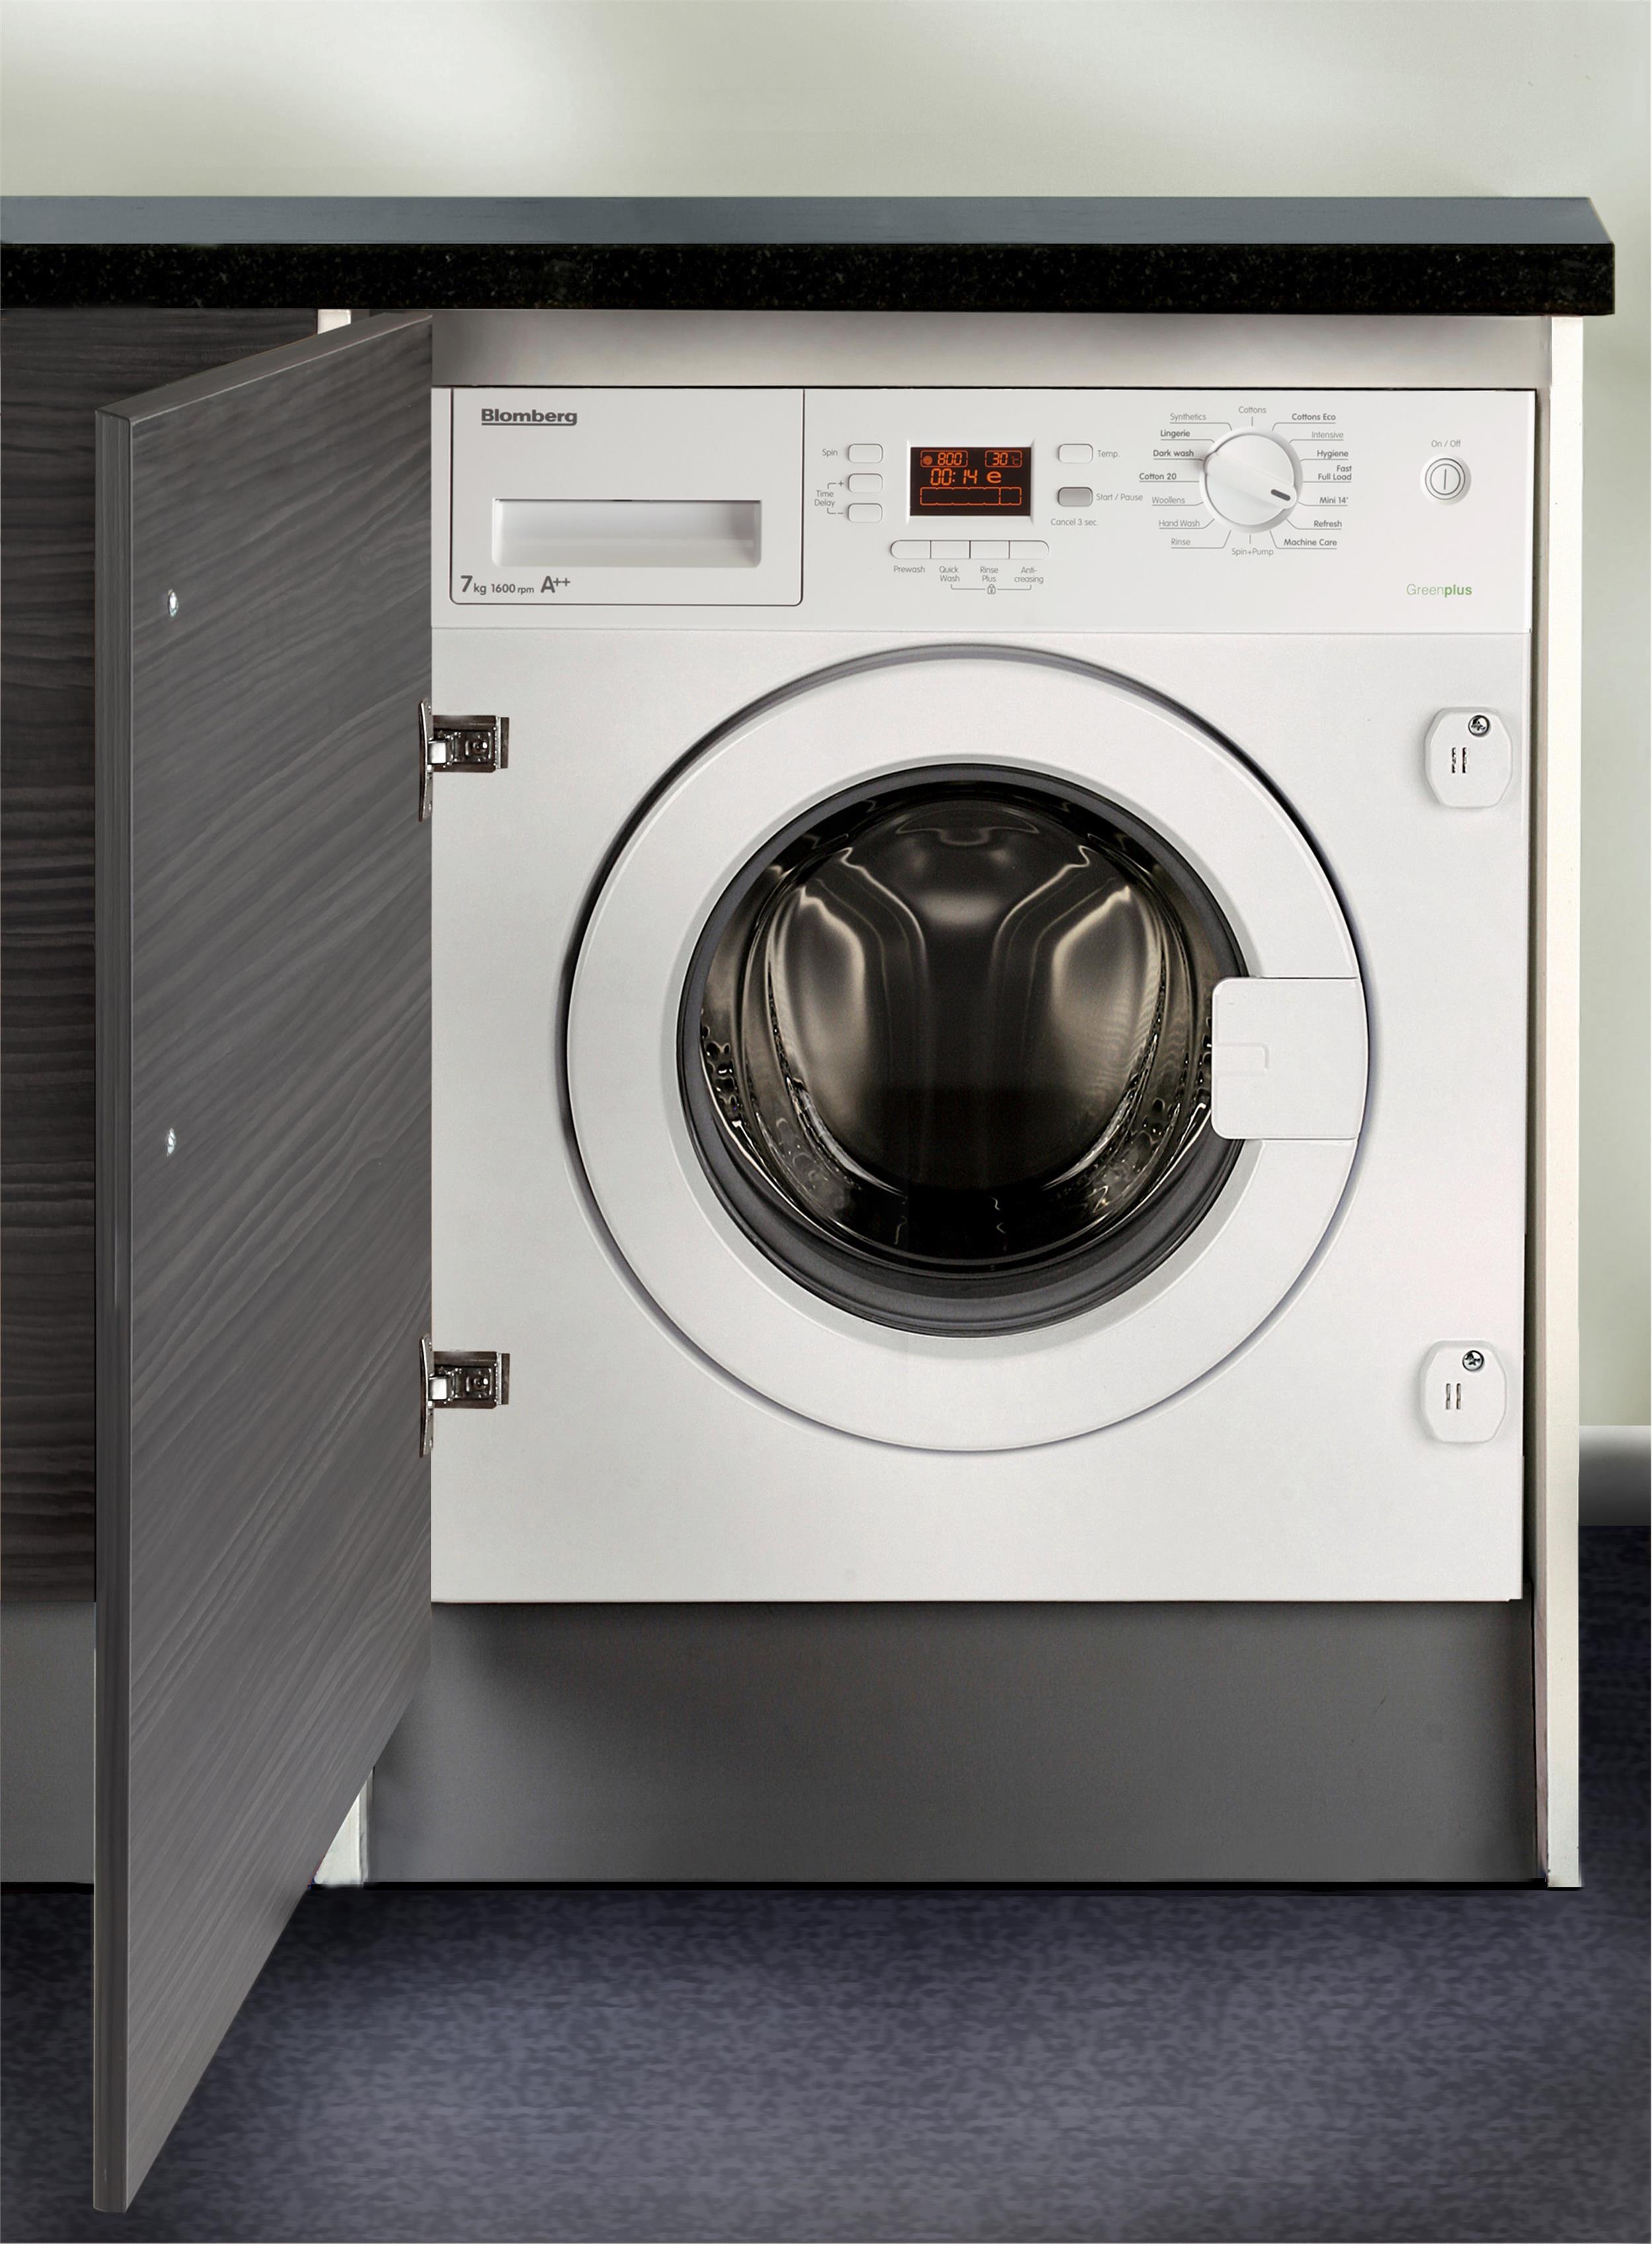 WMI7462W20 Integrated 8kg 1600rpm washing machine with A++ energy rating